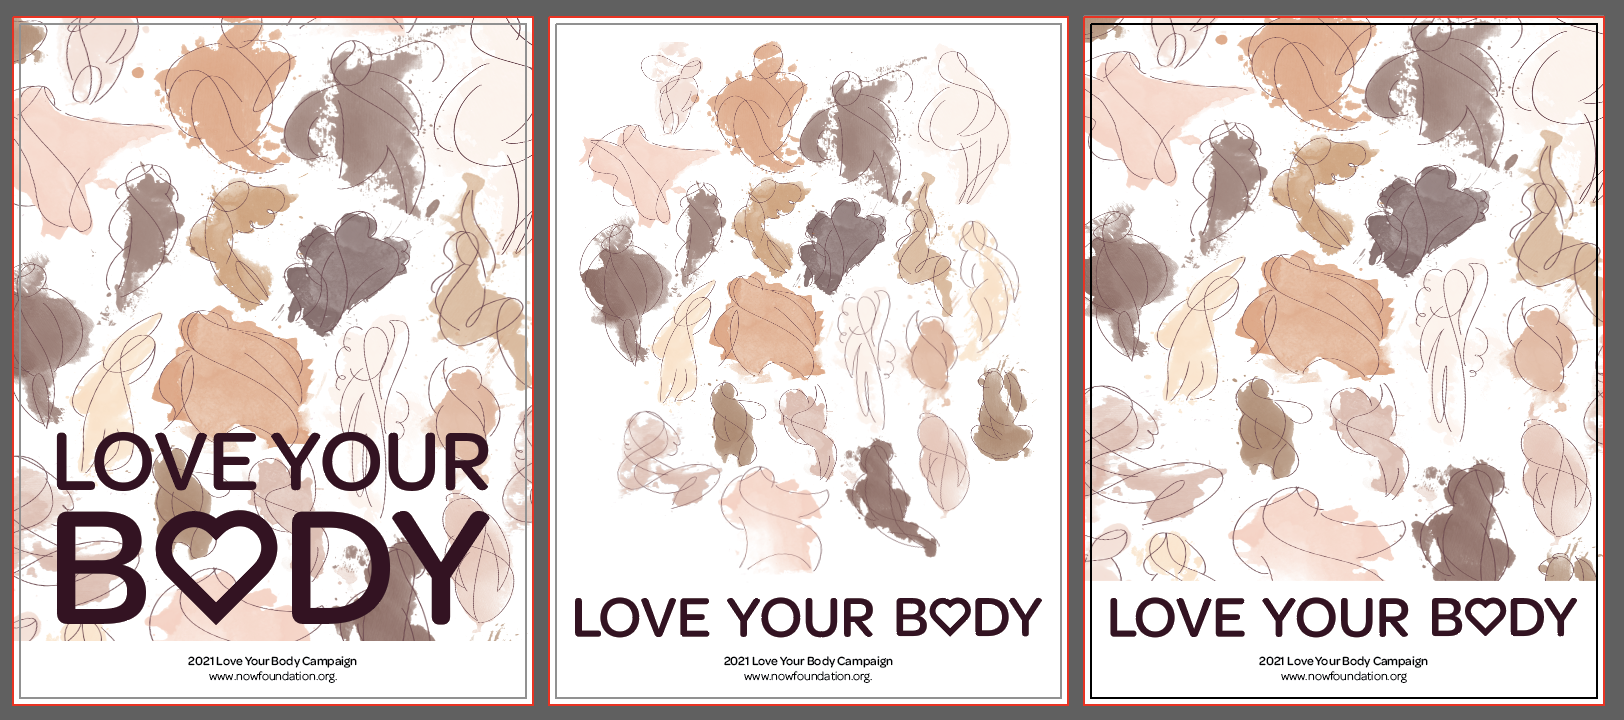 Top 3 poster designs developed by Alexis Cleveland before final submission into Love Your Body poster contest